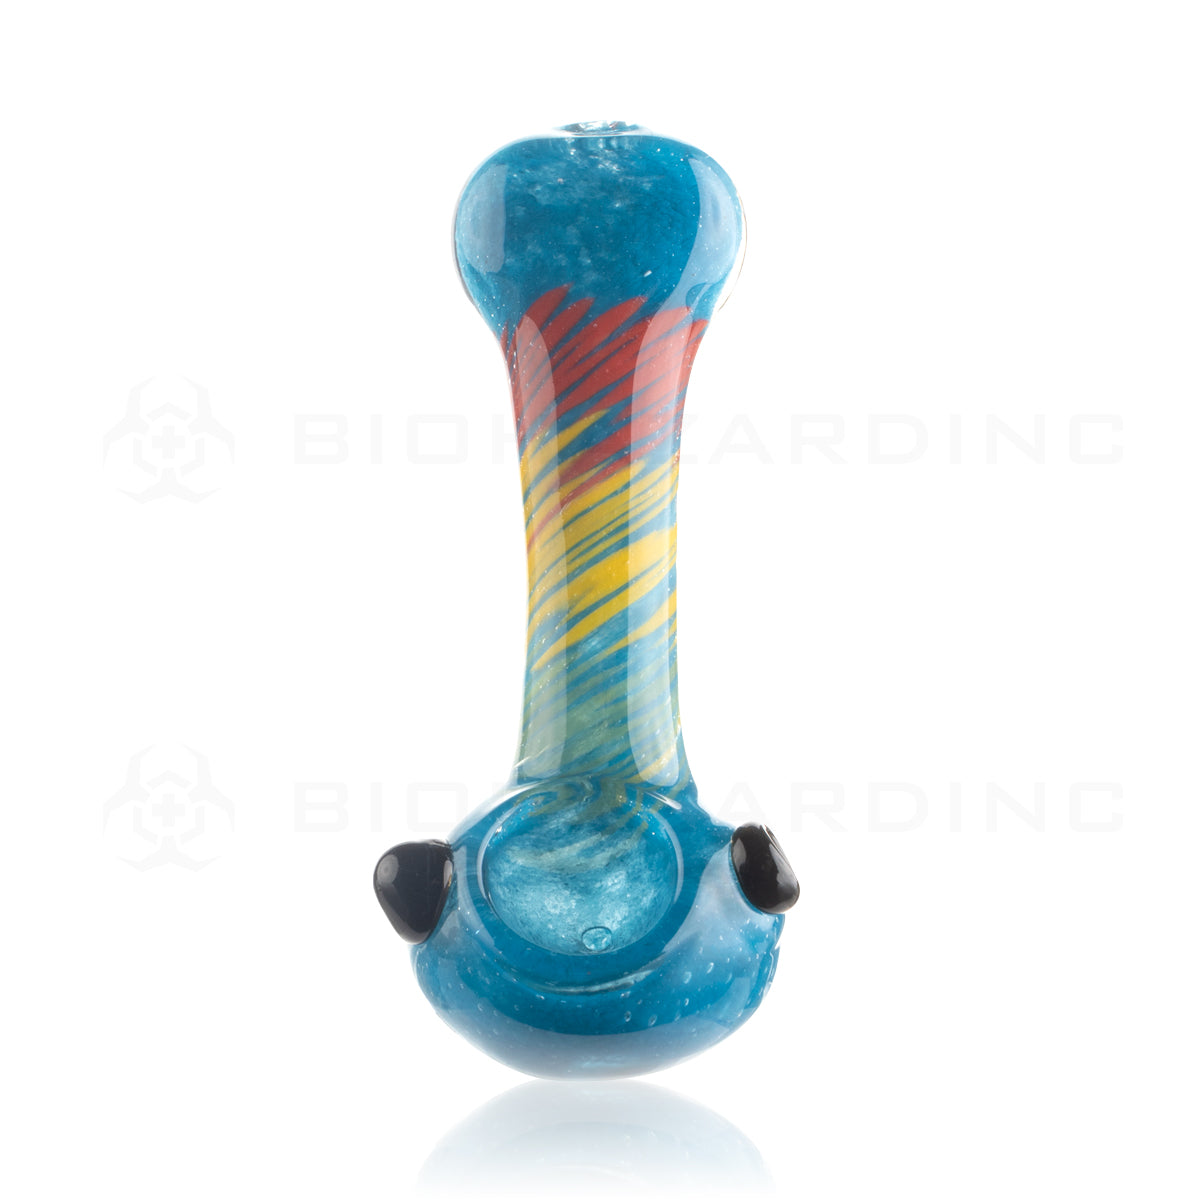 Hand Pipe | Classic Glass Spoon Fritted Hand Pipe w/ Rasta Stripe | 4" - Glass - Assorted Colors Glass Hand Pipe Biohazard Inc   